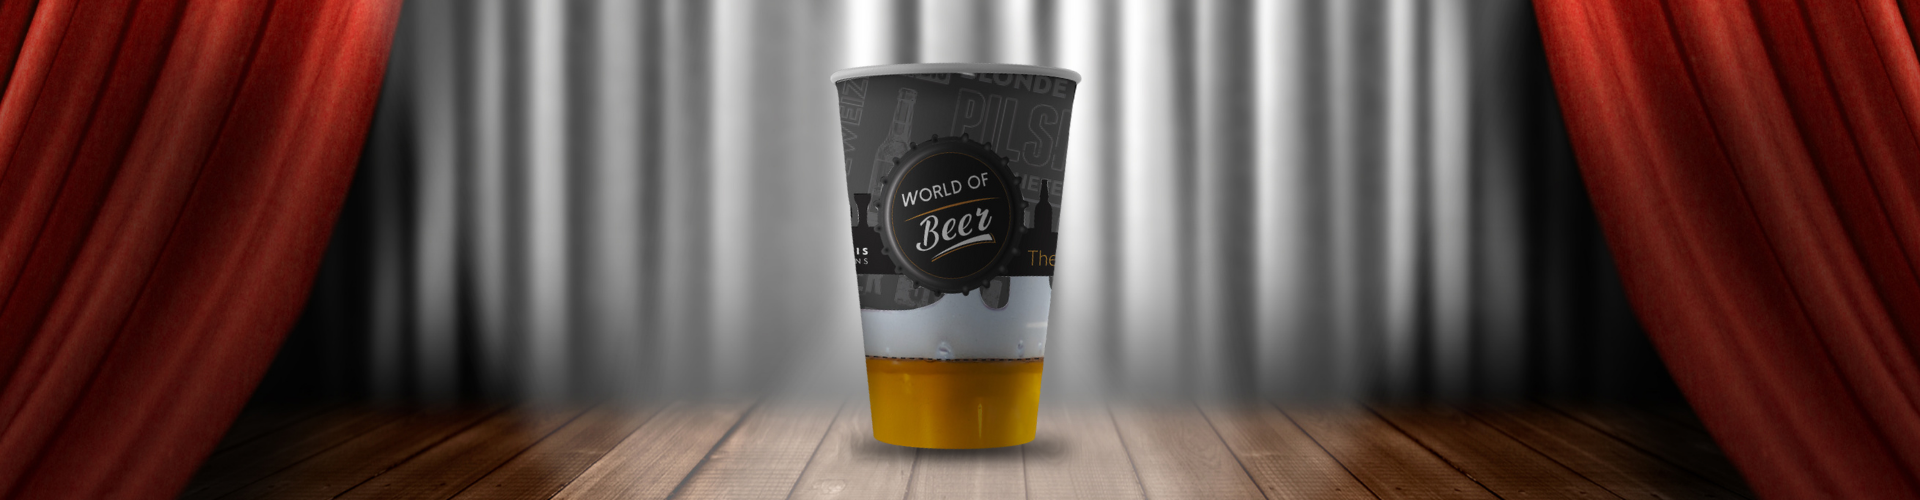 We present to you the collectible WOB cup